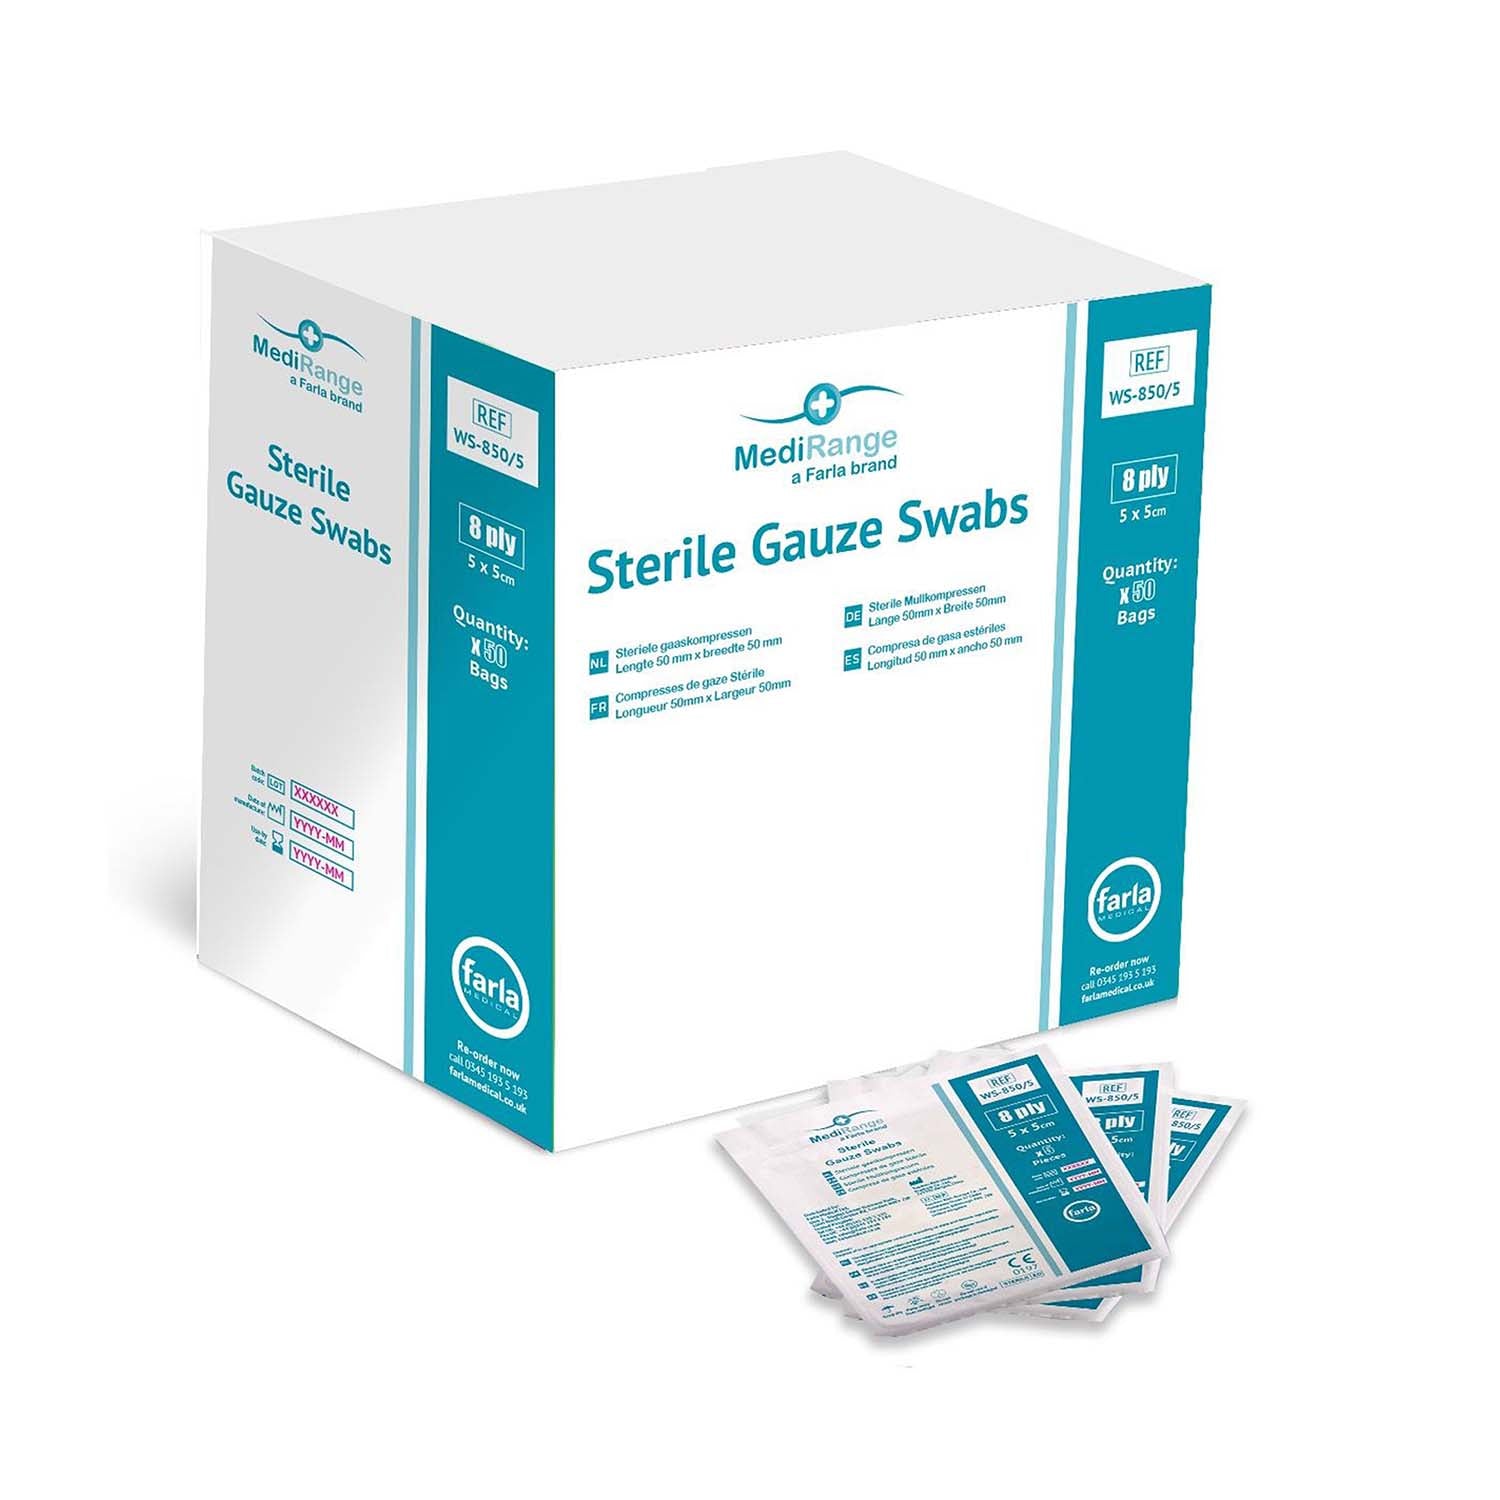 MediRange Gauze Swabs | 5 x 5cm | 8 ply | Sterile | Pack of 50 | x5 Pieces per Pouch | Short Expiry Date